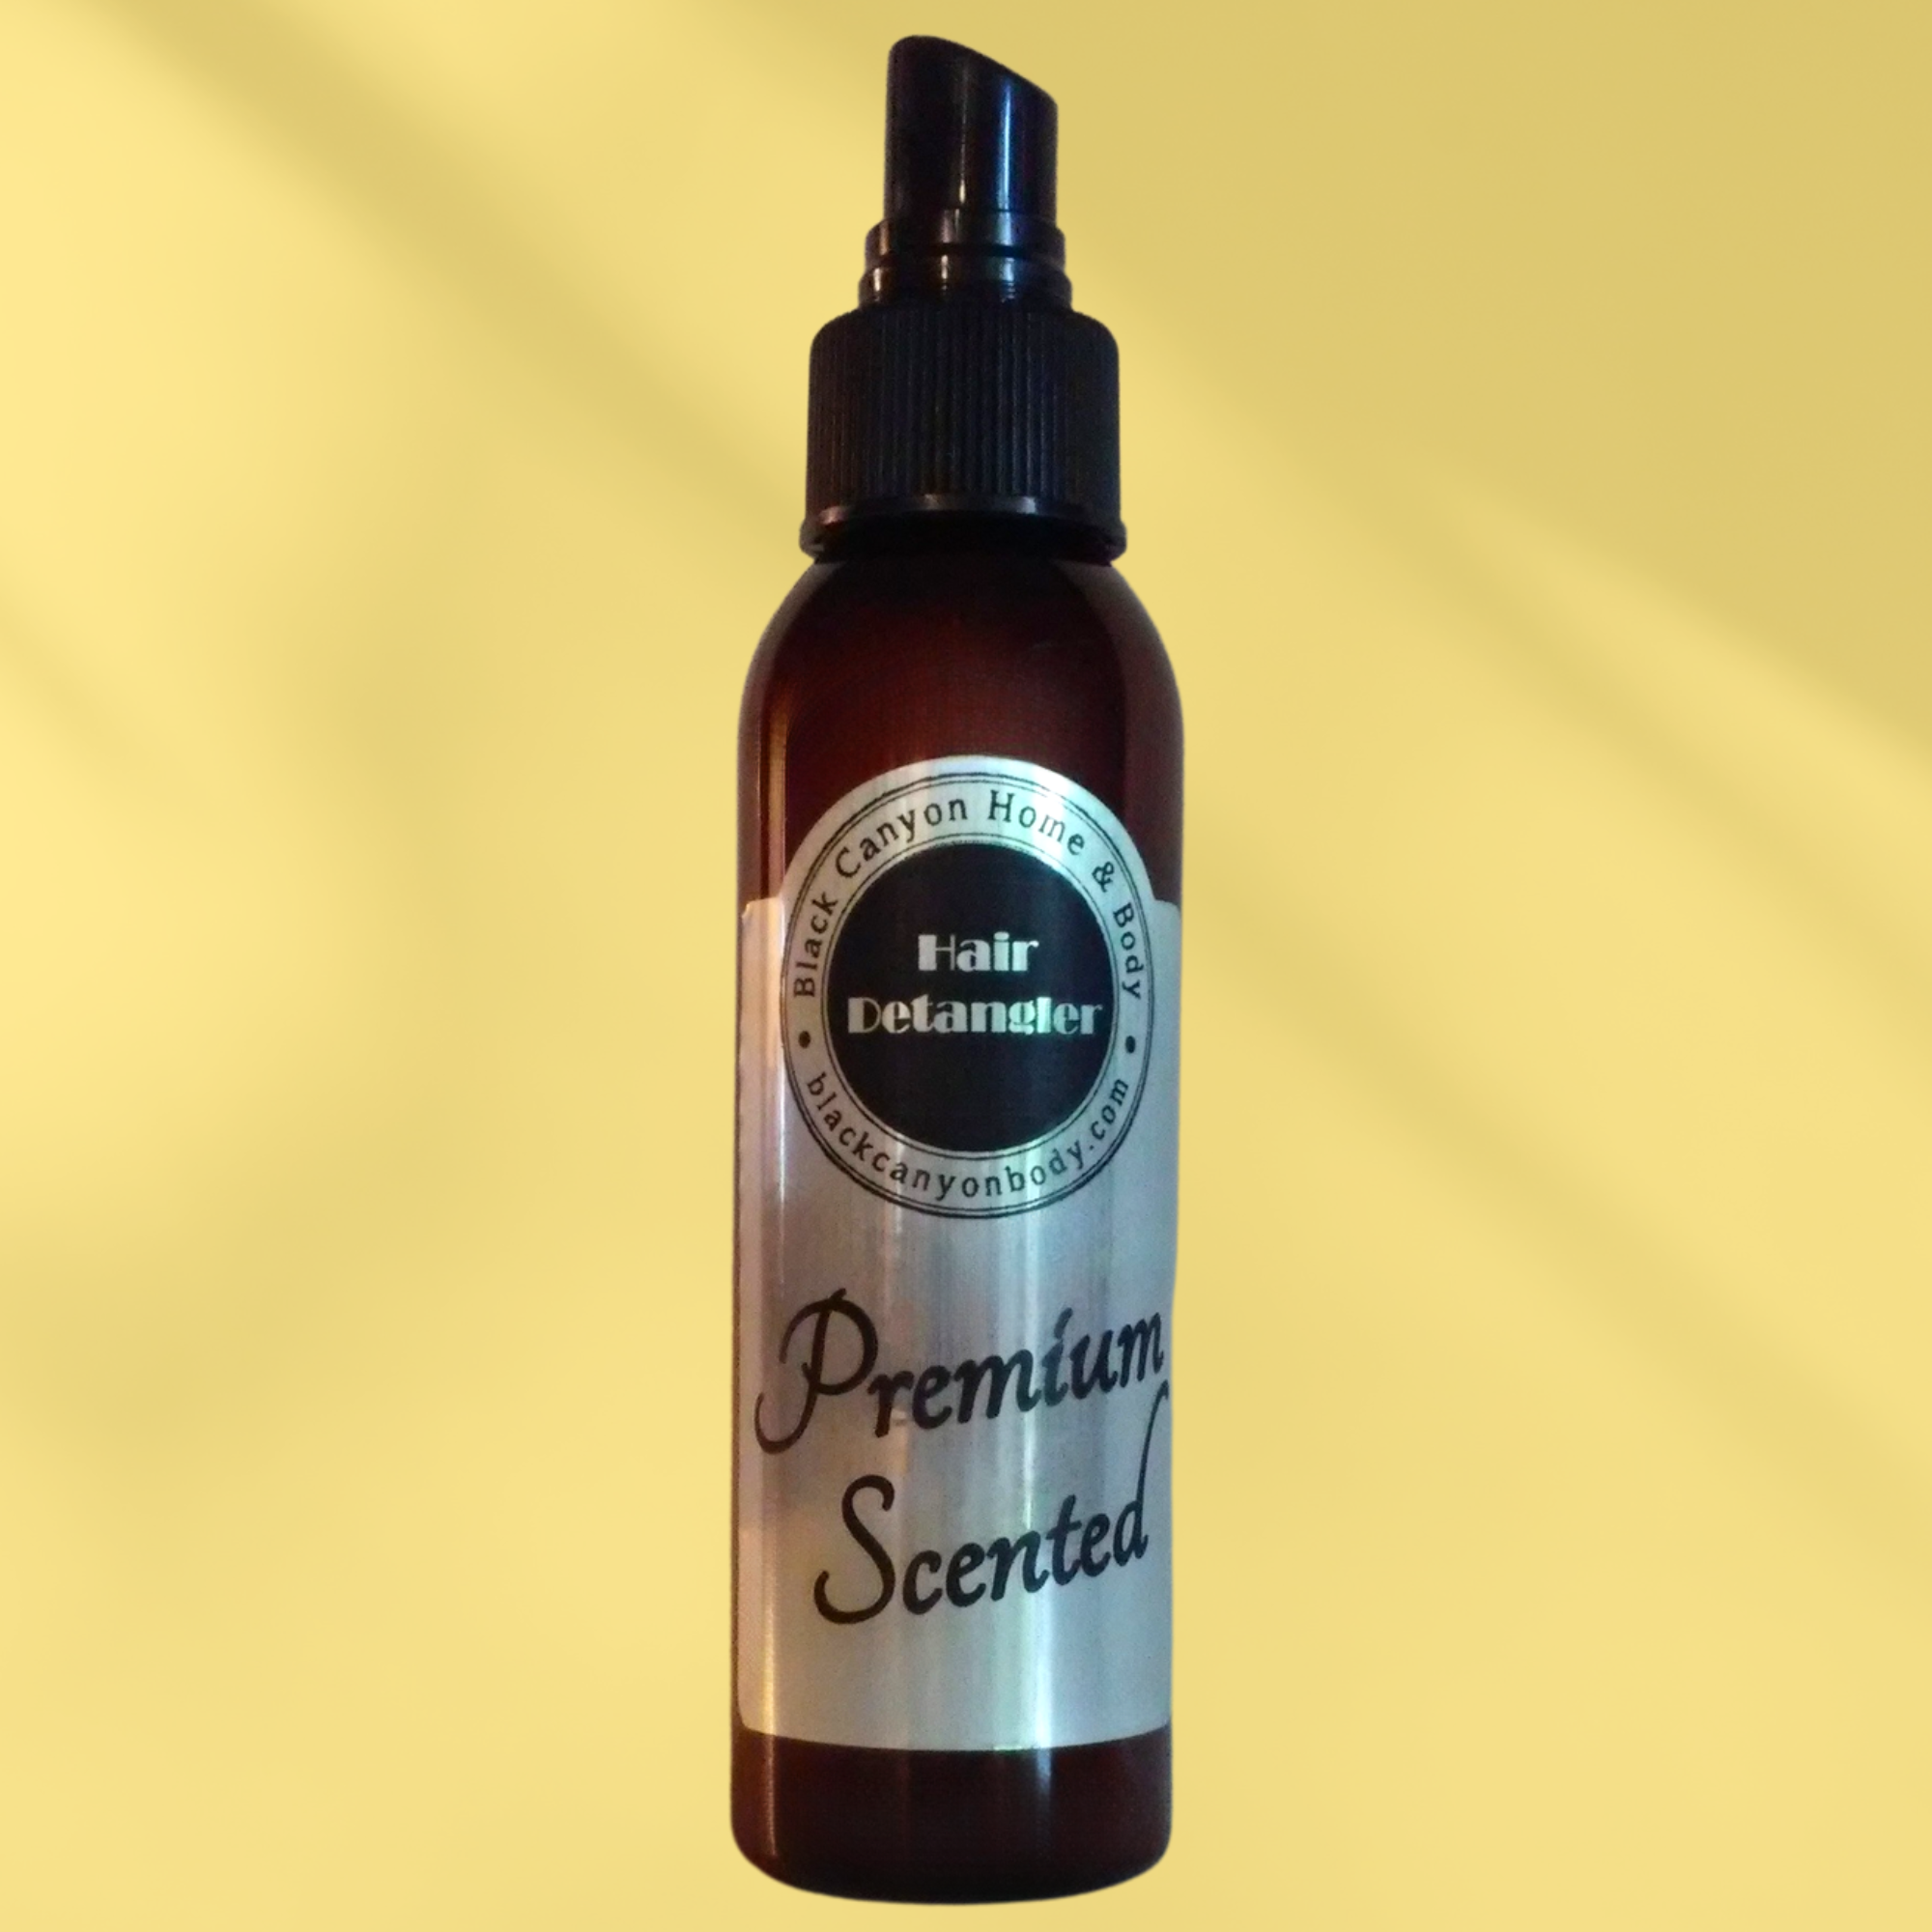 Black Canyon Cherry Spice Scented Hair Detangler Spray with Olive Oil